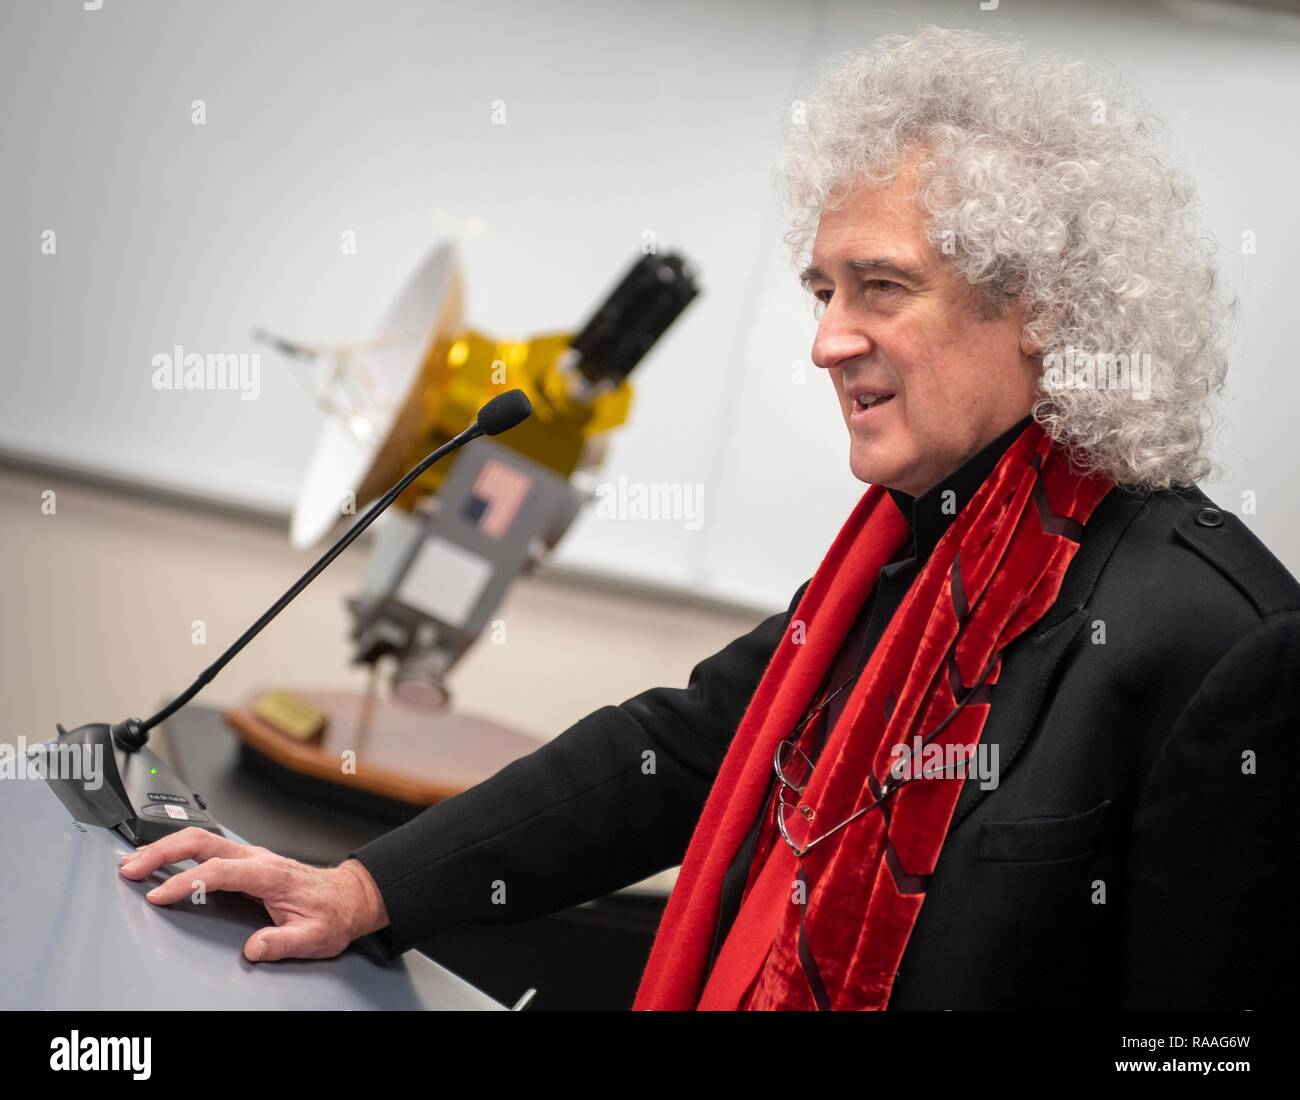 Brian May, lead guitarist of the rock band Queen and astrophysicist during a briefing prior to the expected flyby of Ultima Thule by the New Horizon spacecraft at Johns Hopkins University Applied Physics Laboratory December 31, 2018 in Laurel, Maryland. The flyby by the space probe occurred 6.5bn km (4bn miles) away, making it the most distant ever exploration of an object in our Solar System. Stock Photo